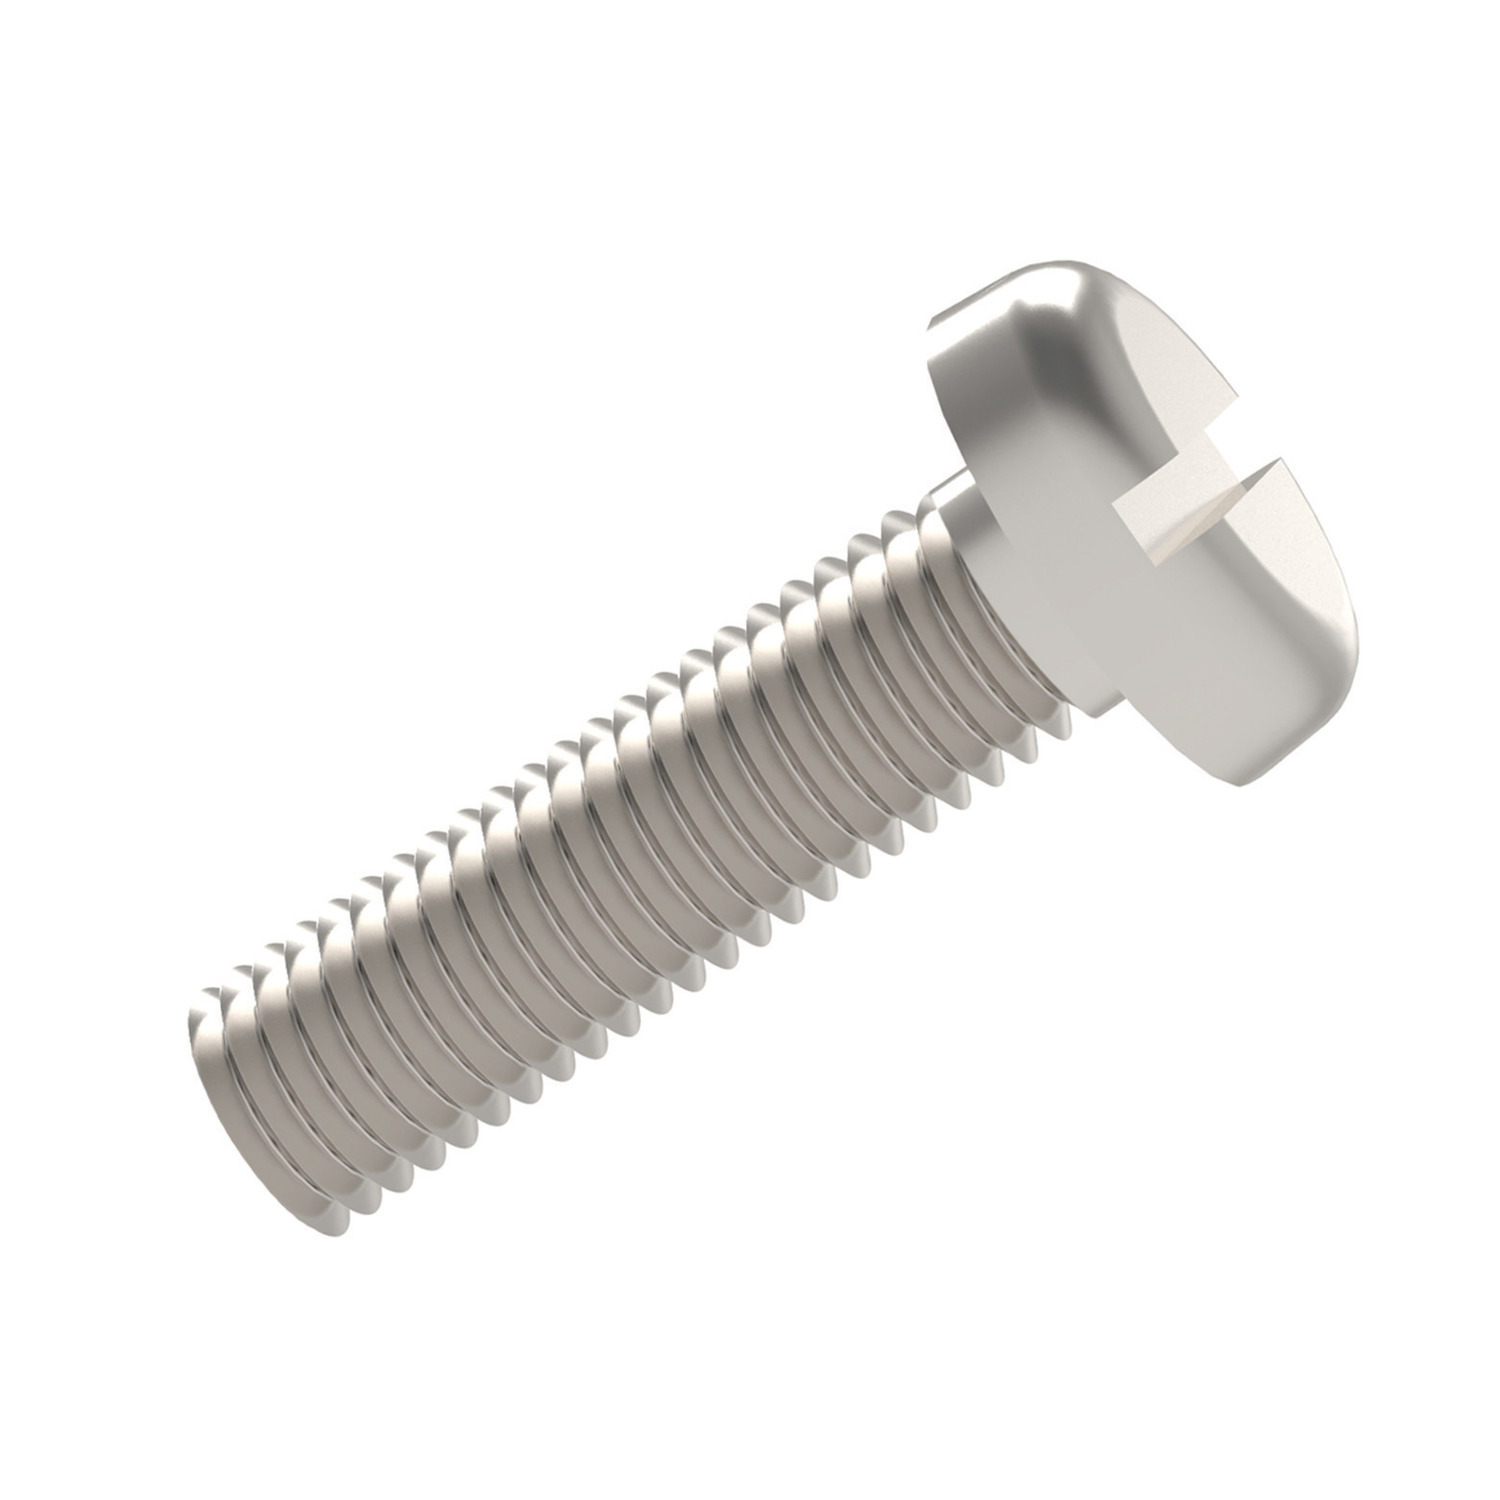 Slot Pan Head Screws To DIN 85, ISO 1580. Threaded within 2,5 x pitch of head.